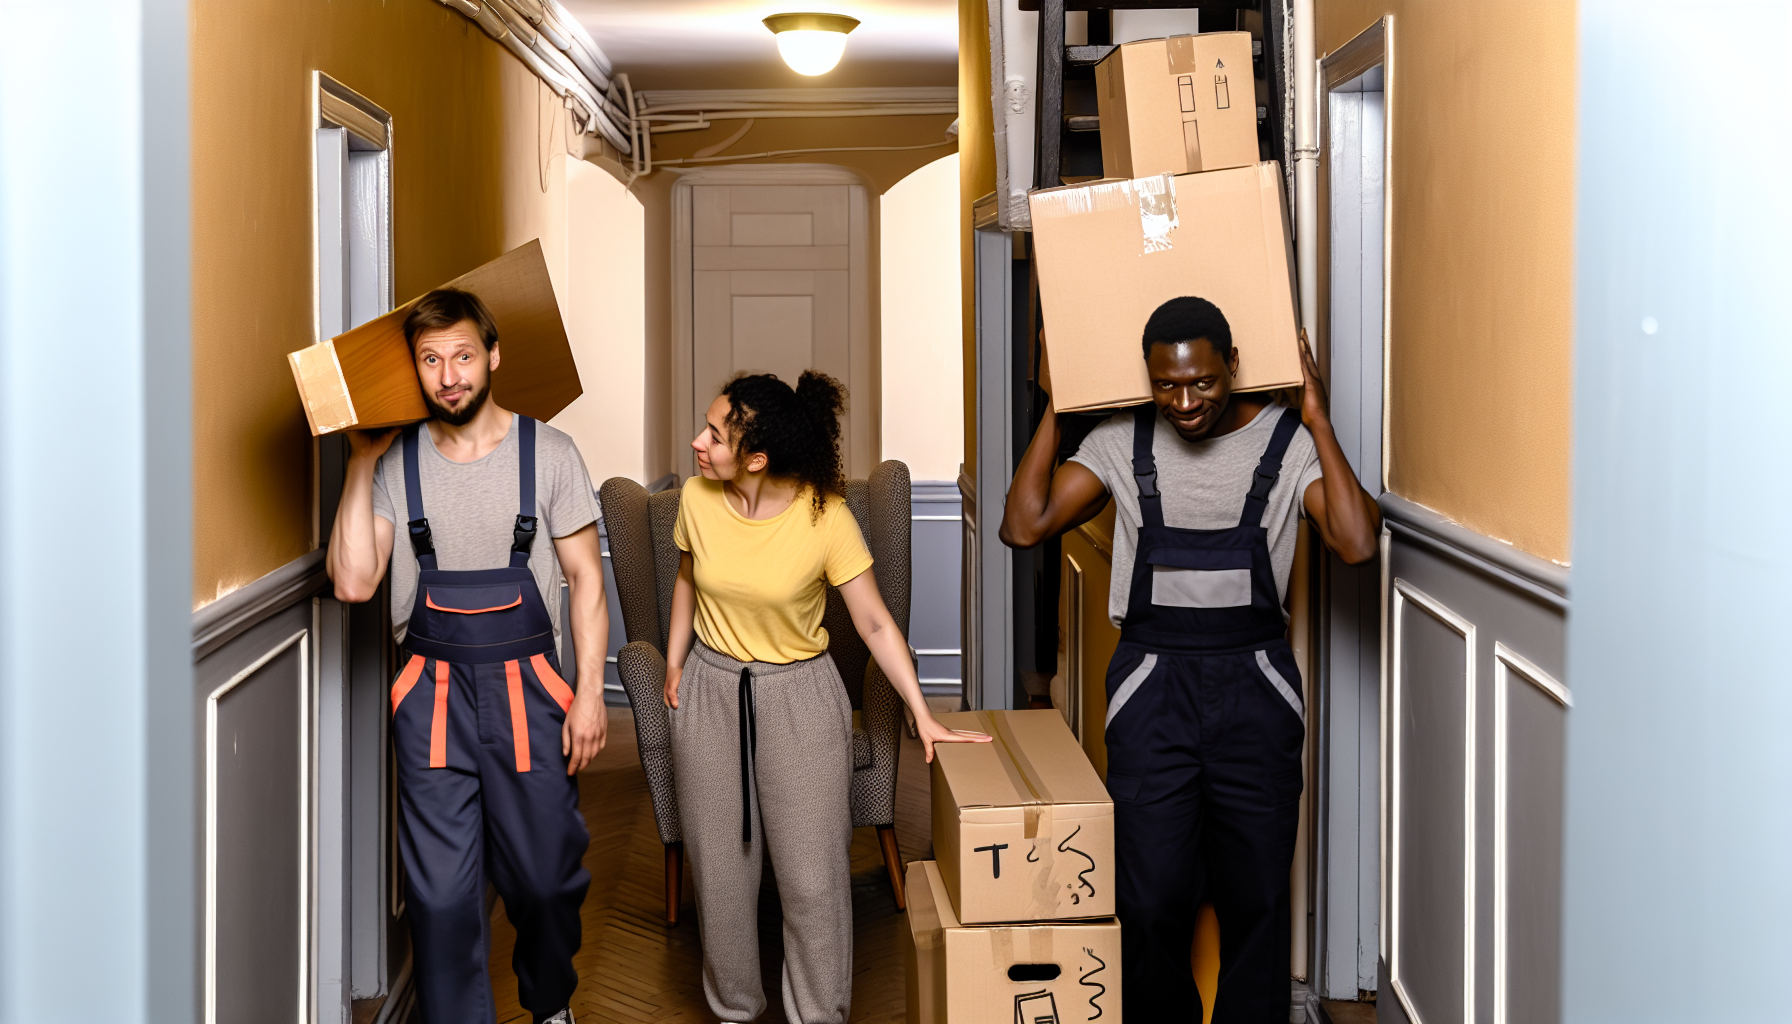 Movers navigating tight spaces in an apartment building